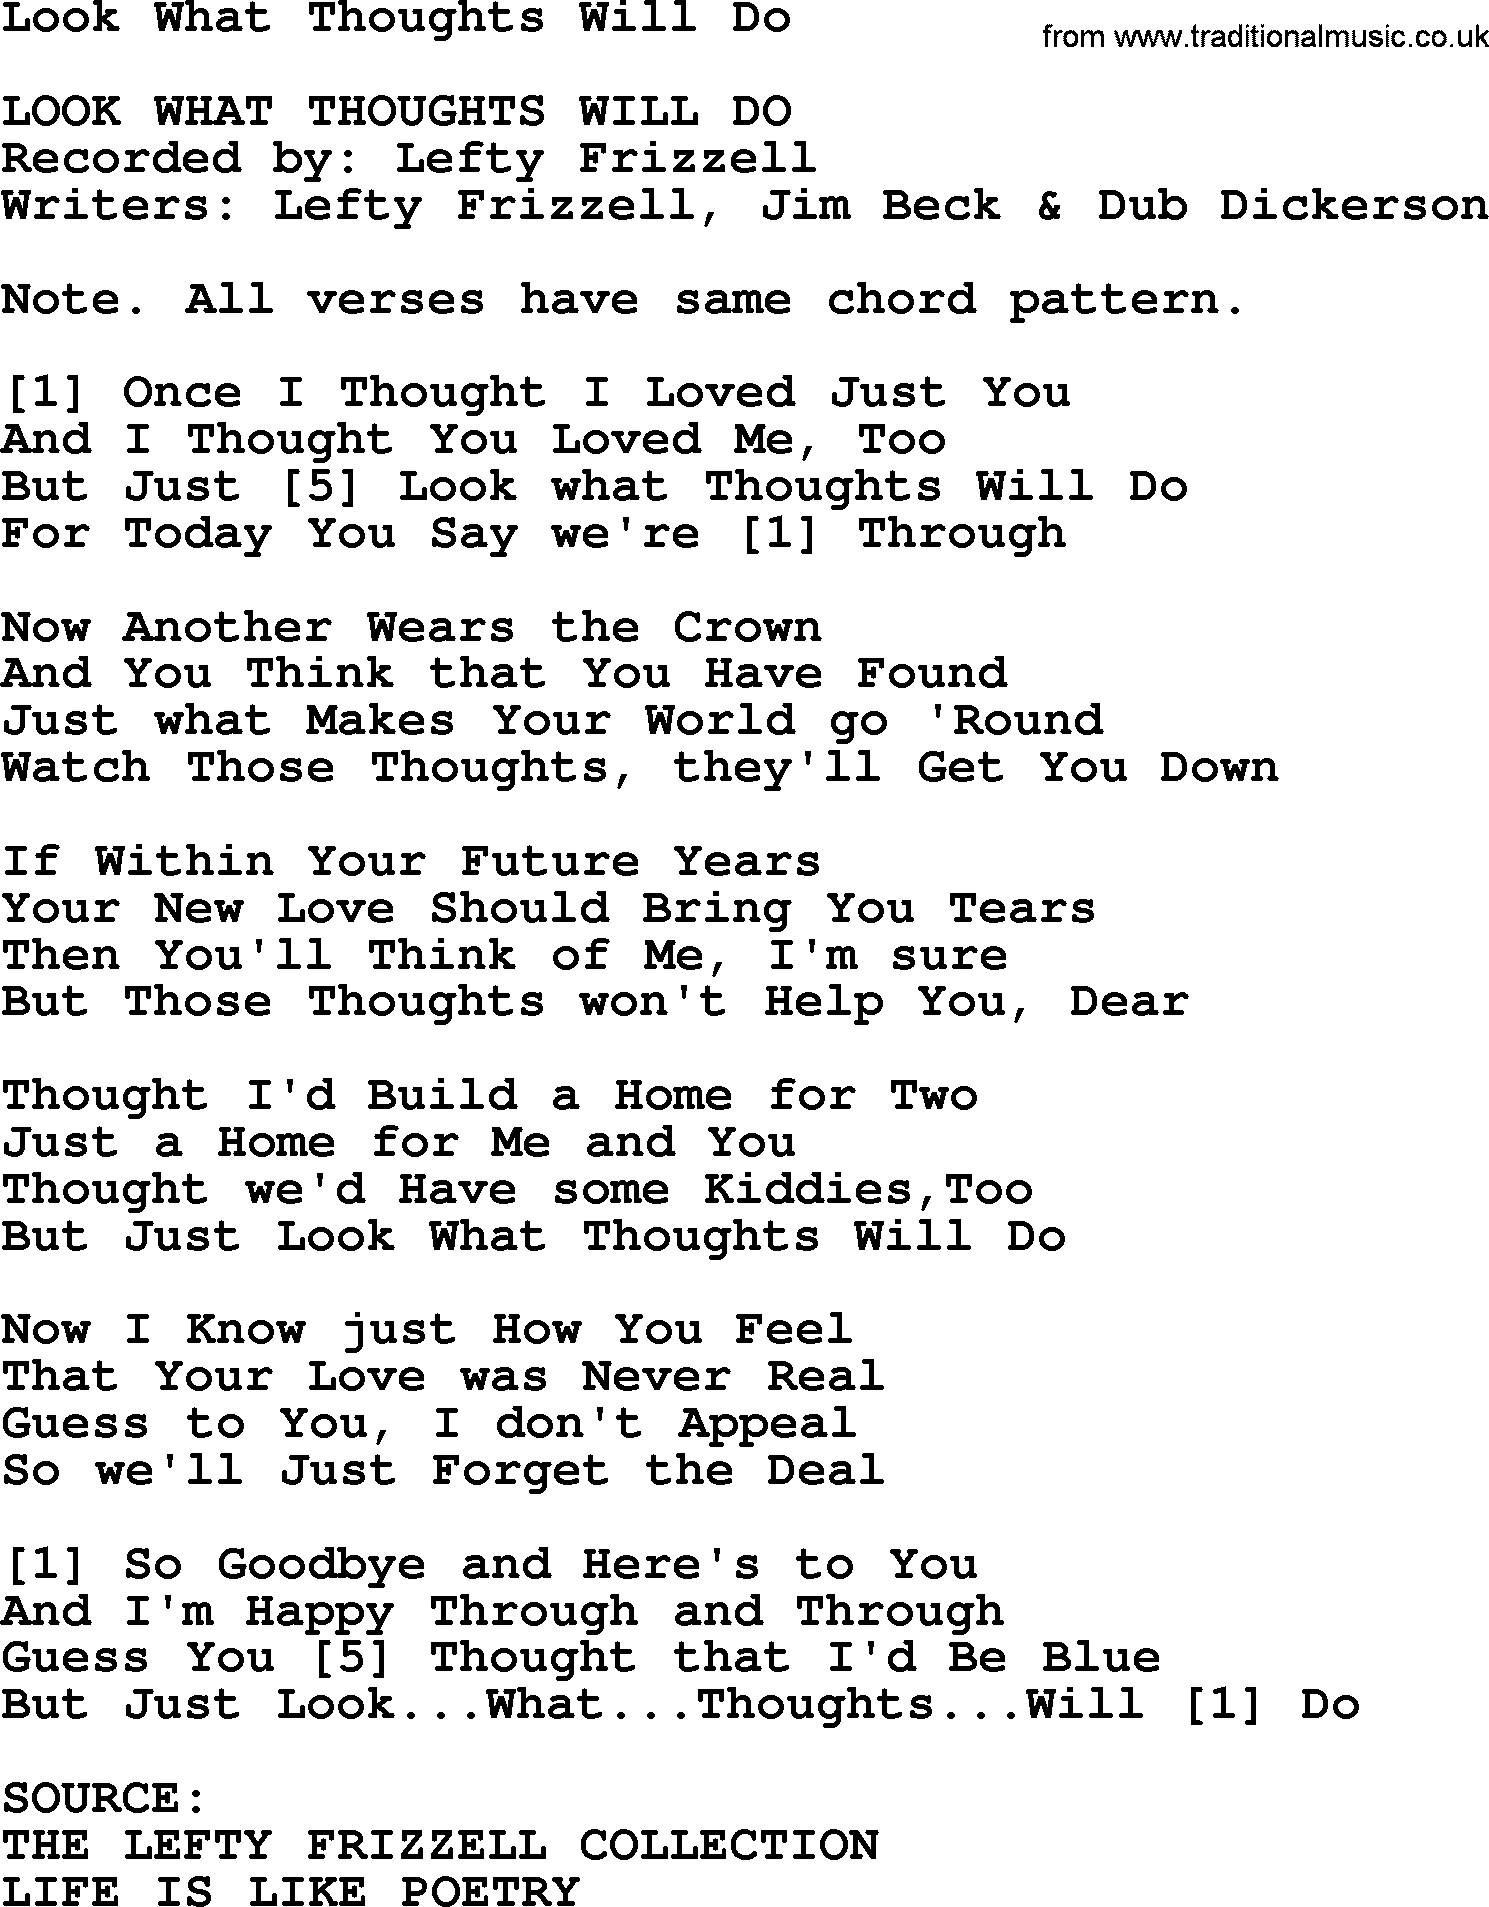 Bluegrass song: Look What Thoughts Will Do, lyrics and chords